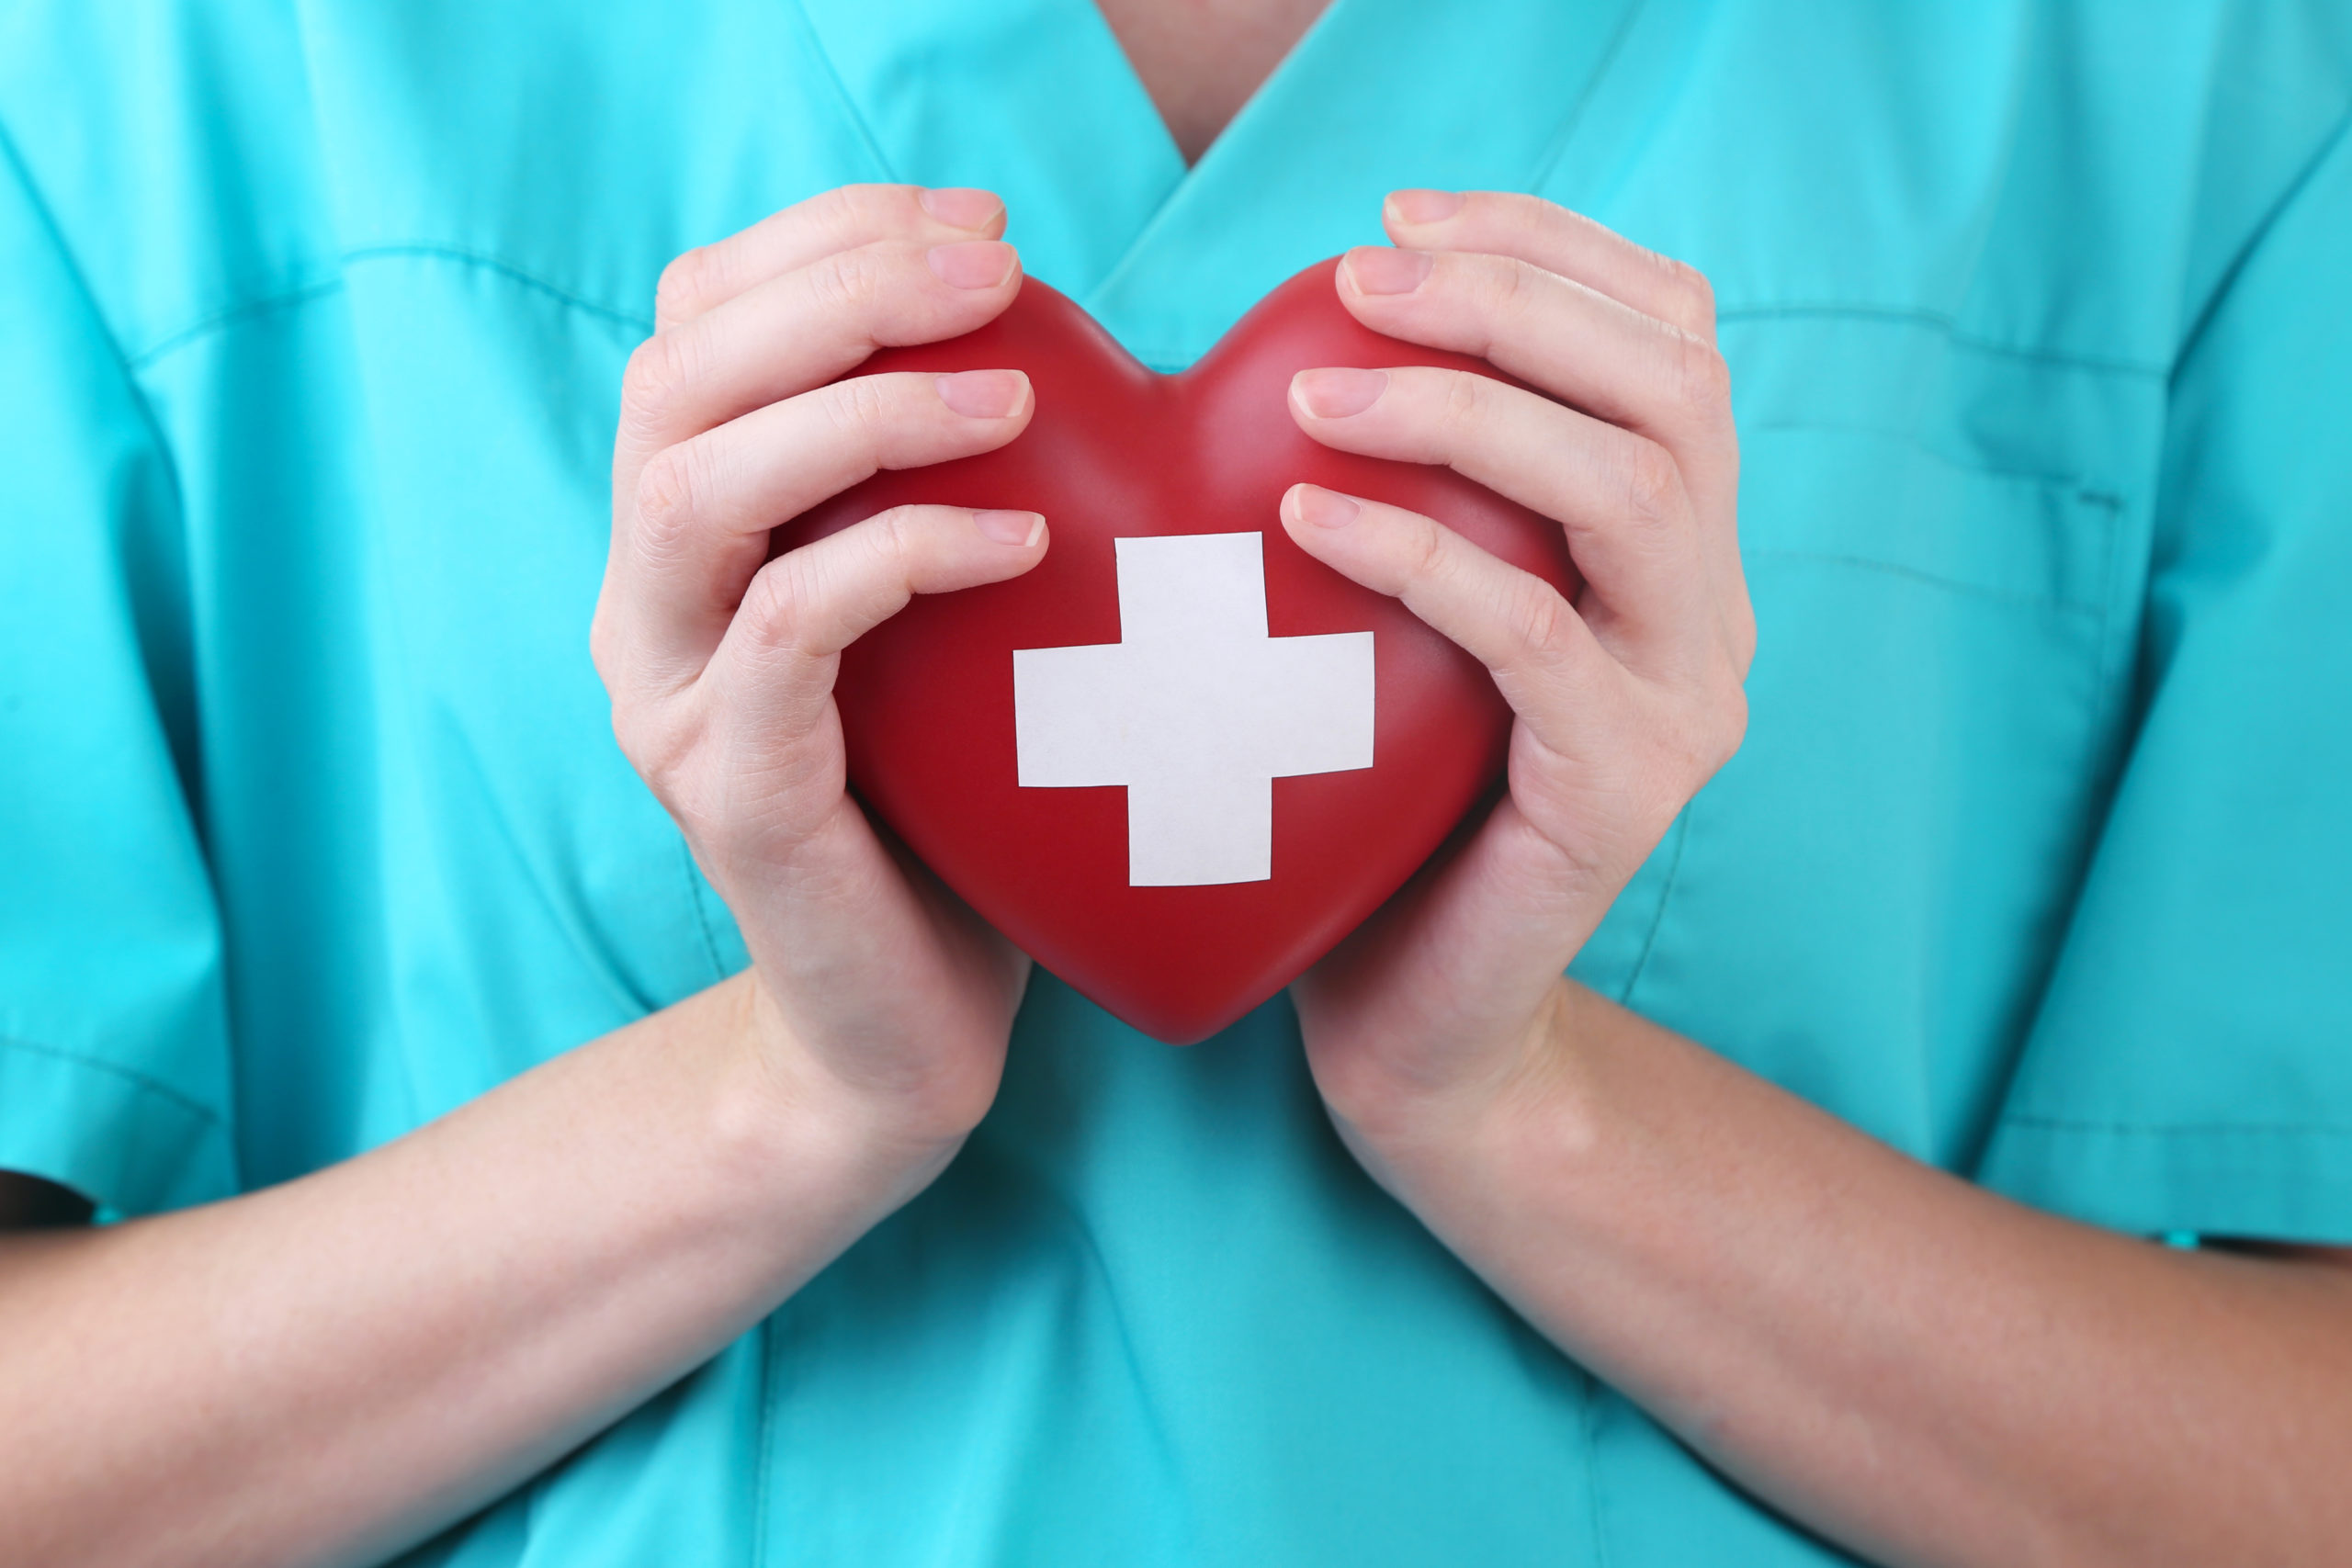 A close-up red heart with a white cross held in a doctor’s hand symbolizes athletes dying of heart attacks. 